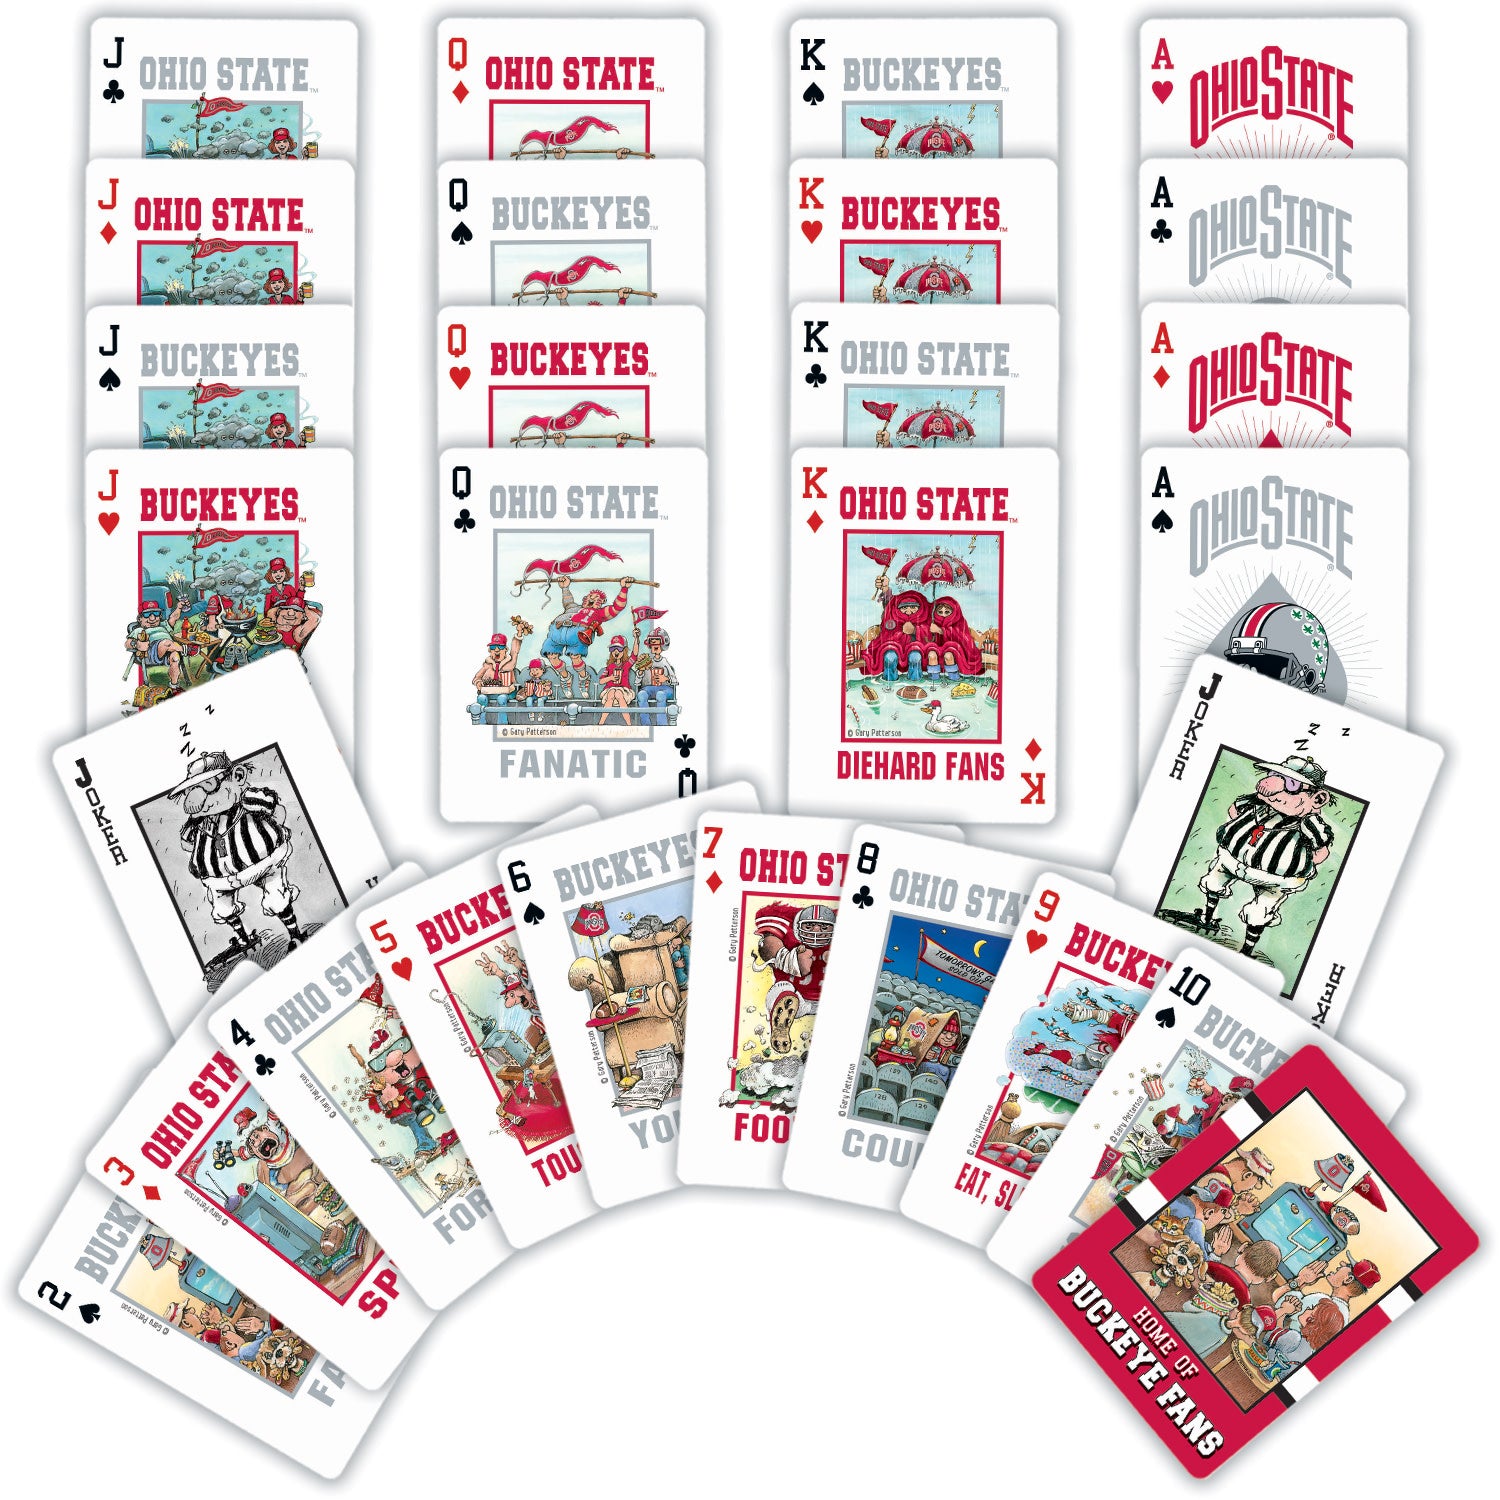 Ohio State Buckeyes Fan Deck Playing Cards